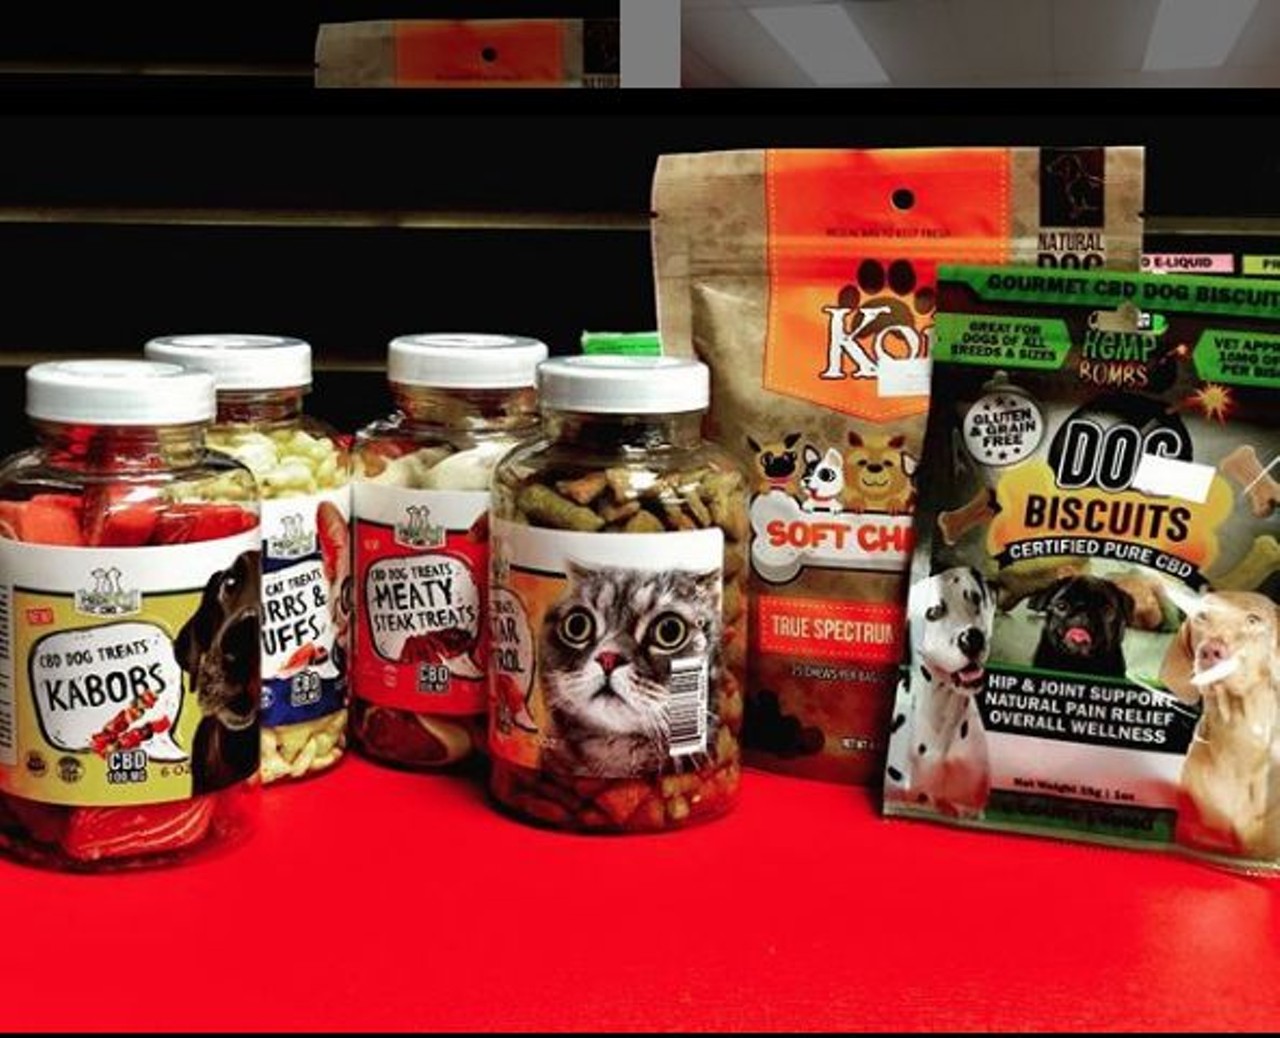 CBD treats for dogs and cats, $12.99+
Detroit Smoke and Vape
4718 Anthony Wayne Dr., Detroit; 313-462-8143
For the loving fur mom/dad: That&#146;s right, folks. Weed ain&#146;t just for humans anymore. Detroit Smoke and Vape offers a slew of CBD treats for your feline or canine fur-family. Not just tasty (well, we haven&#146;t tried them, obviously), but CBD treats are a great reward for the very good boy in your life who might need a little extra pain relief or hip and joint support.  
Photo from Detroit Smoke and Vape, Instagram.